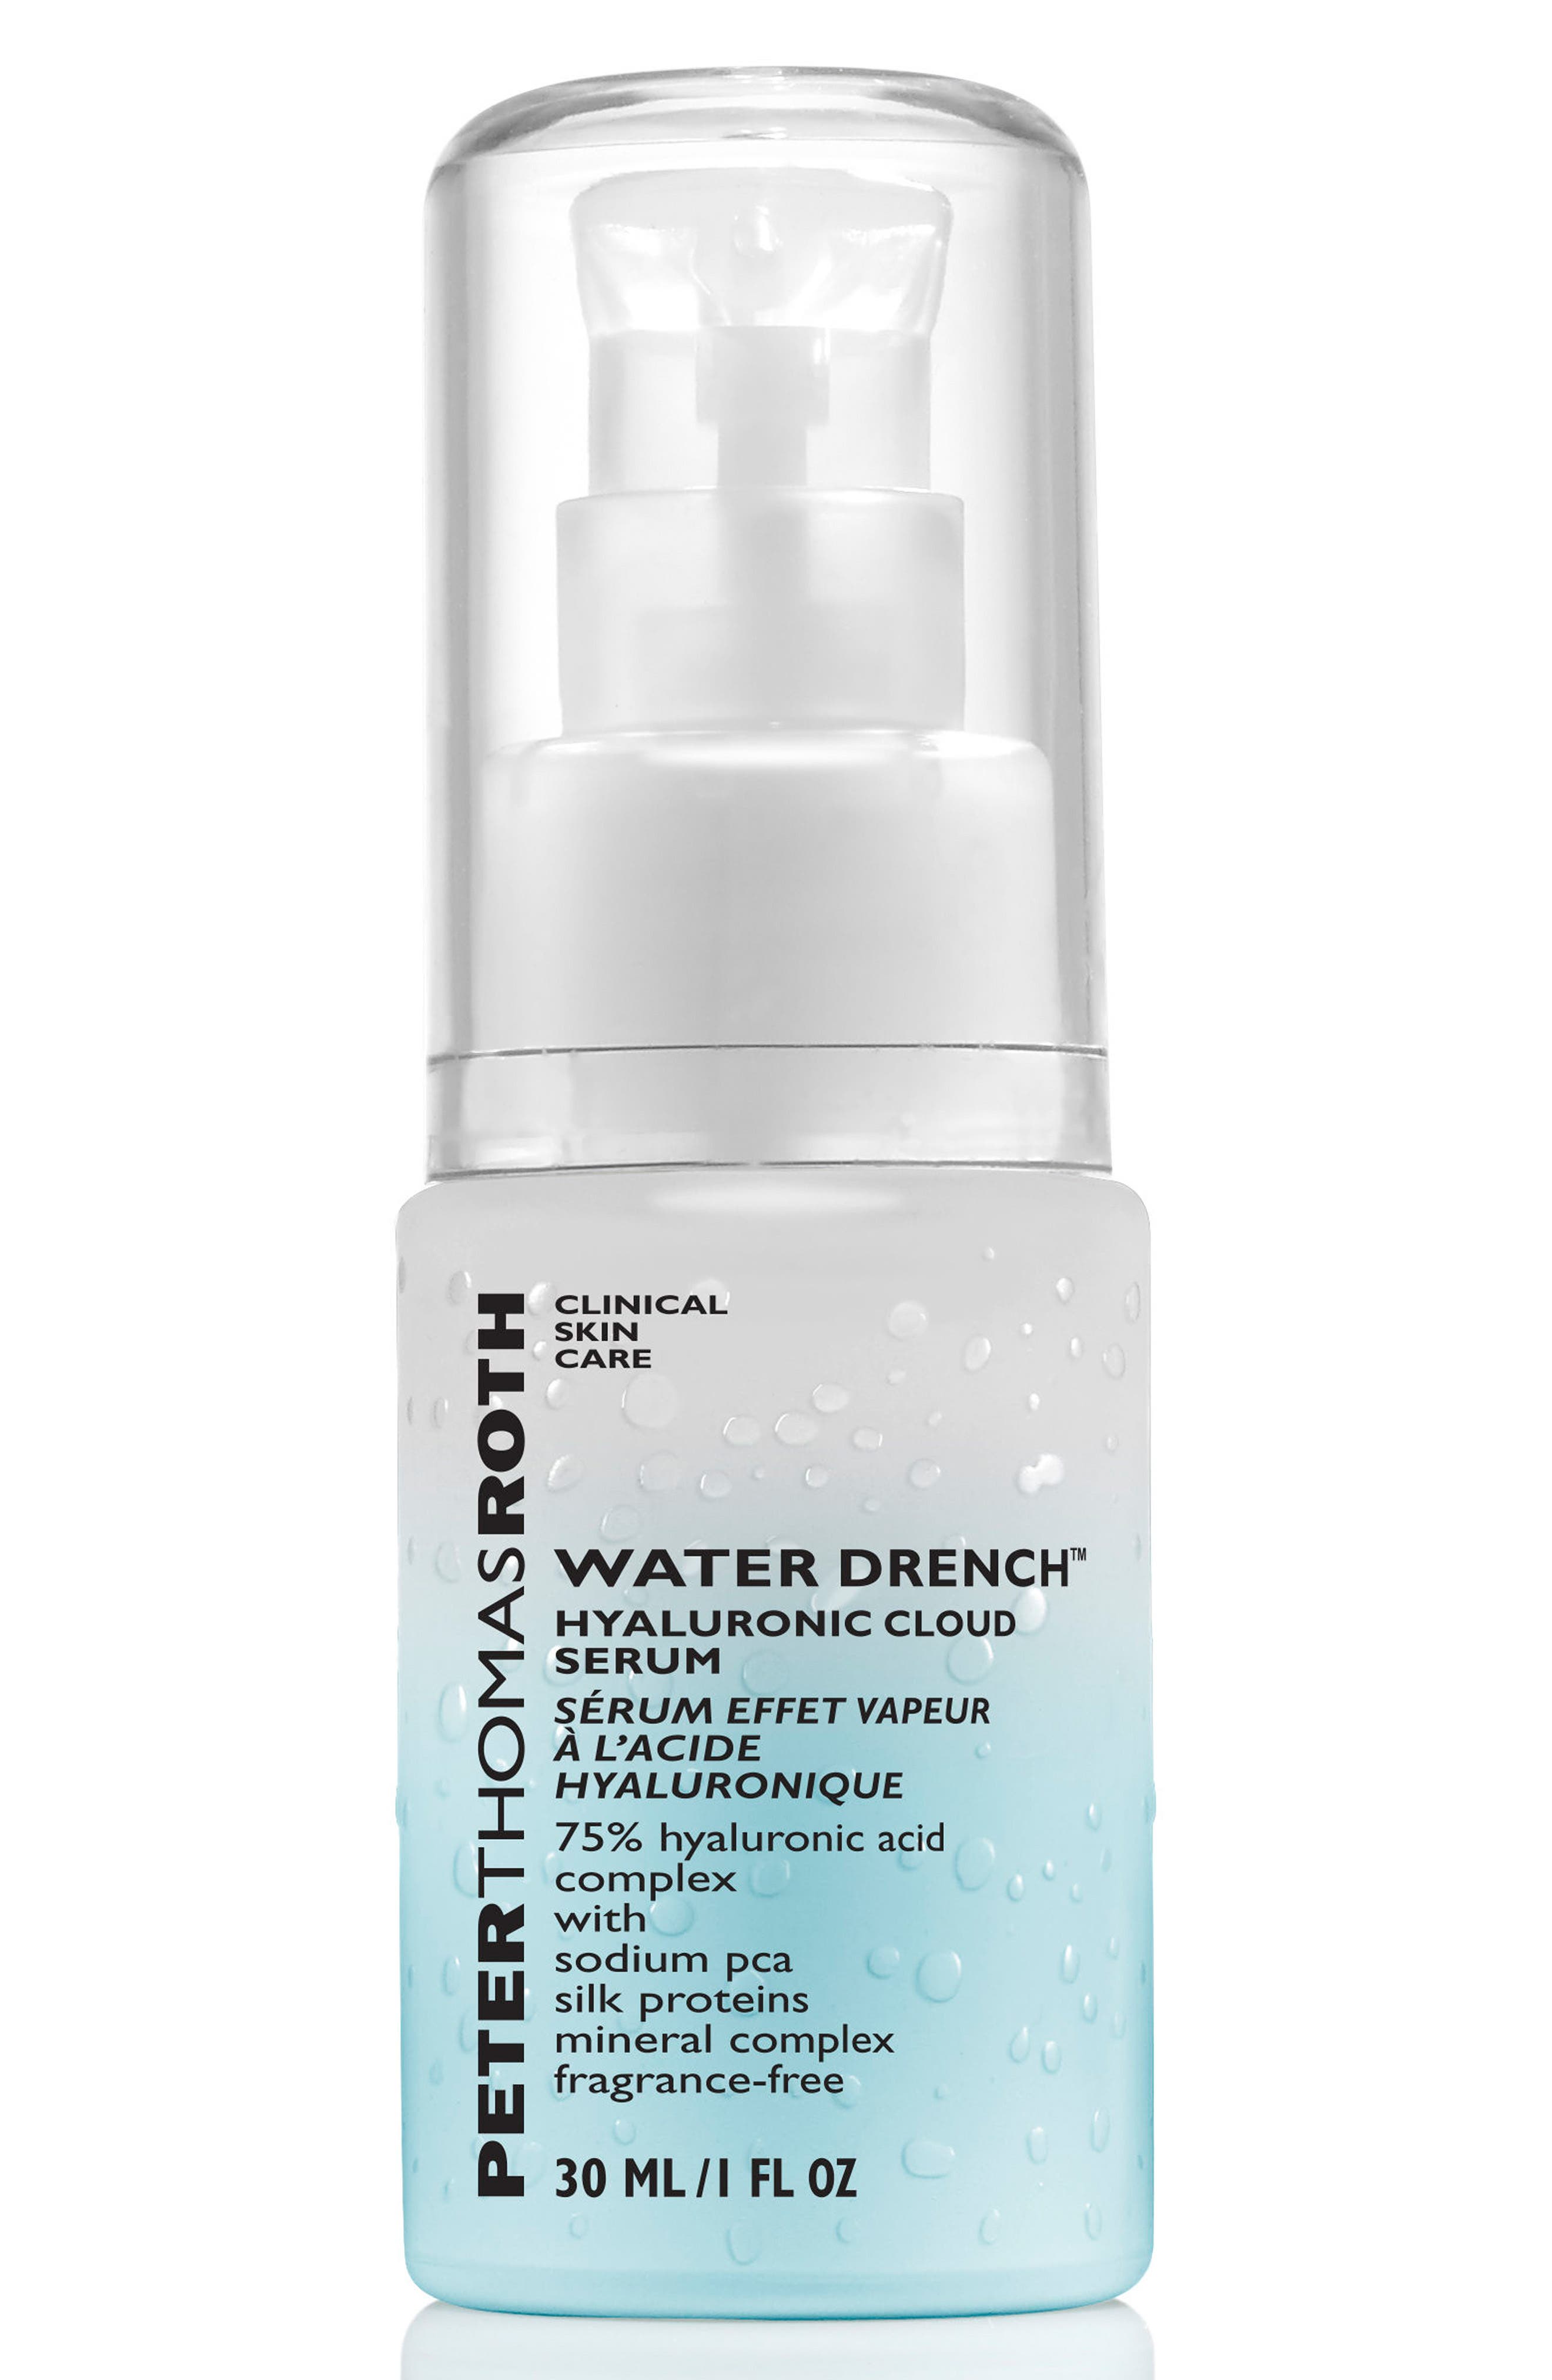 Peter Thomas Roth WATER DRENCH HYALURONIC CLOUD SERUM